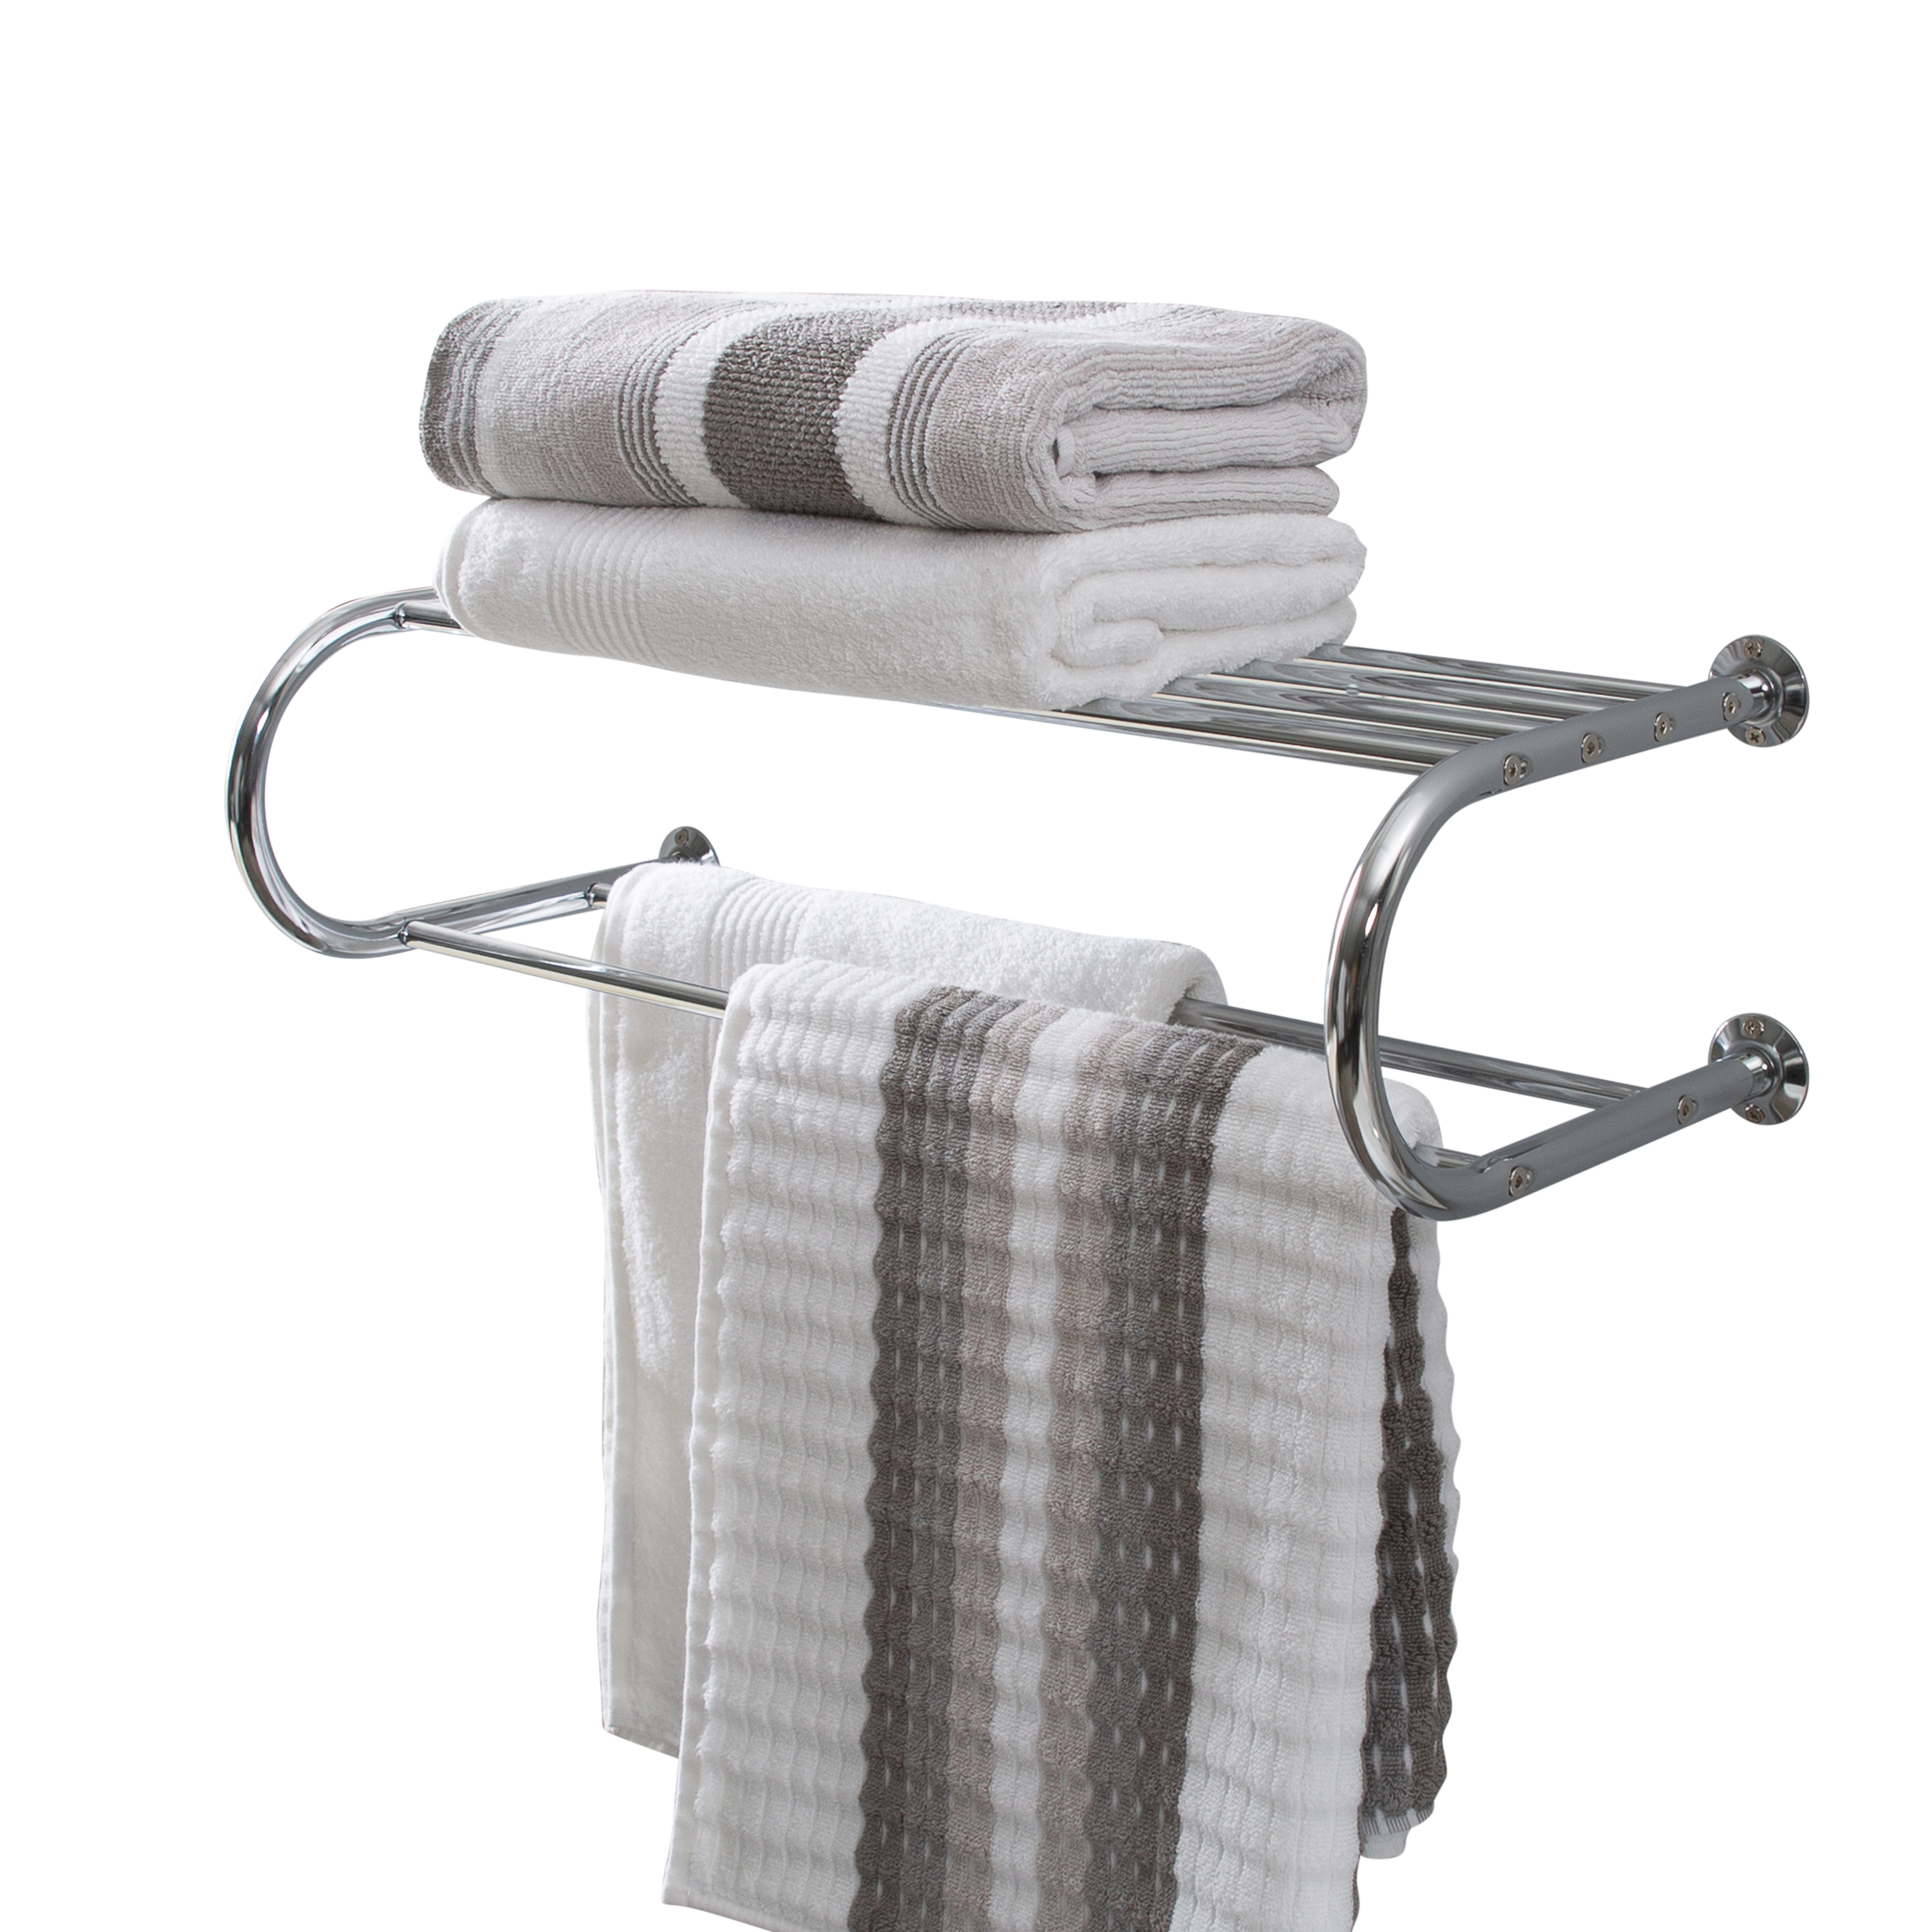 Organize It All Wall Mounted Bath Shelf with Towel Bar in Chrome - image 3 of 6